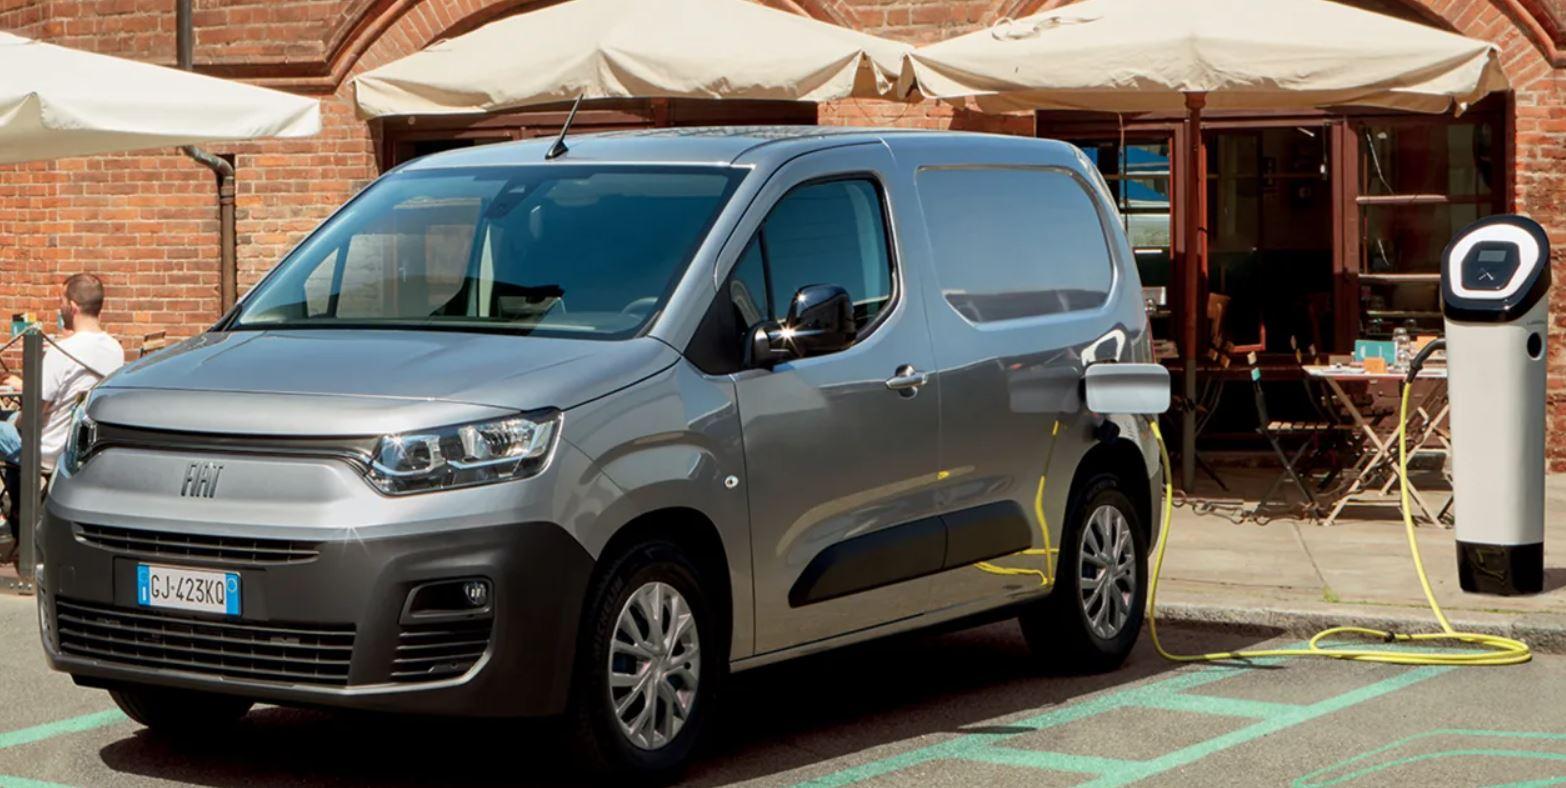 Latest Fiat Professional Doblo set to be joined by all-electric model